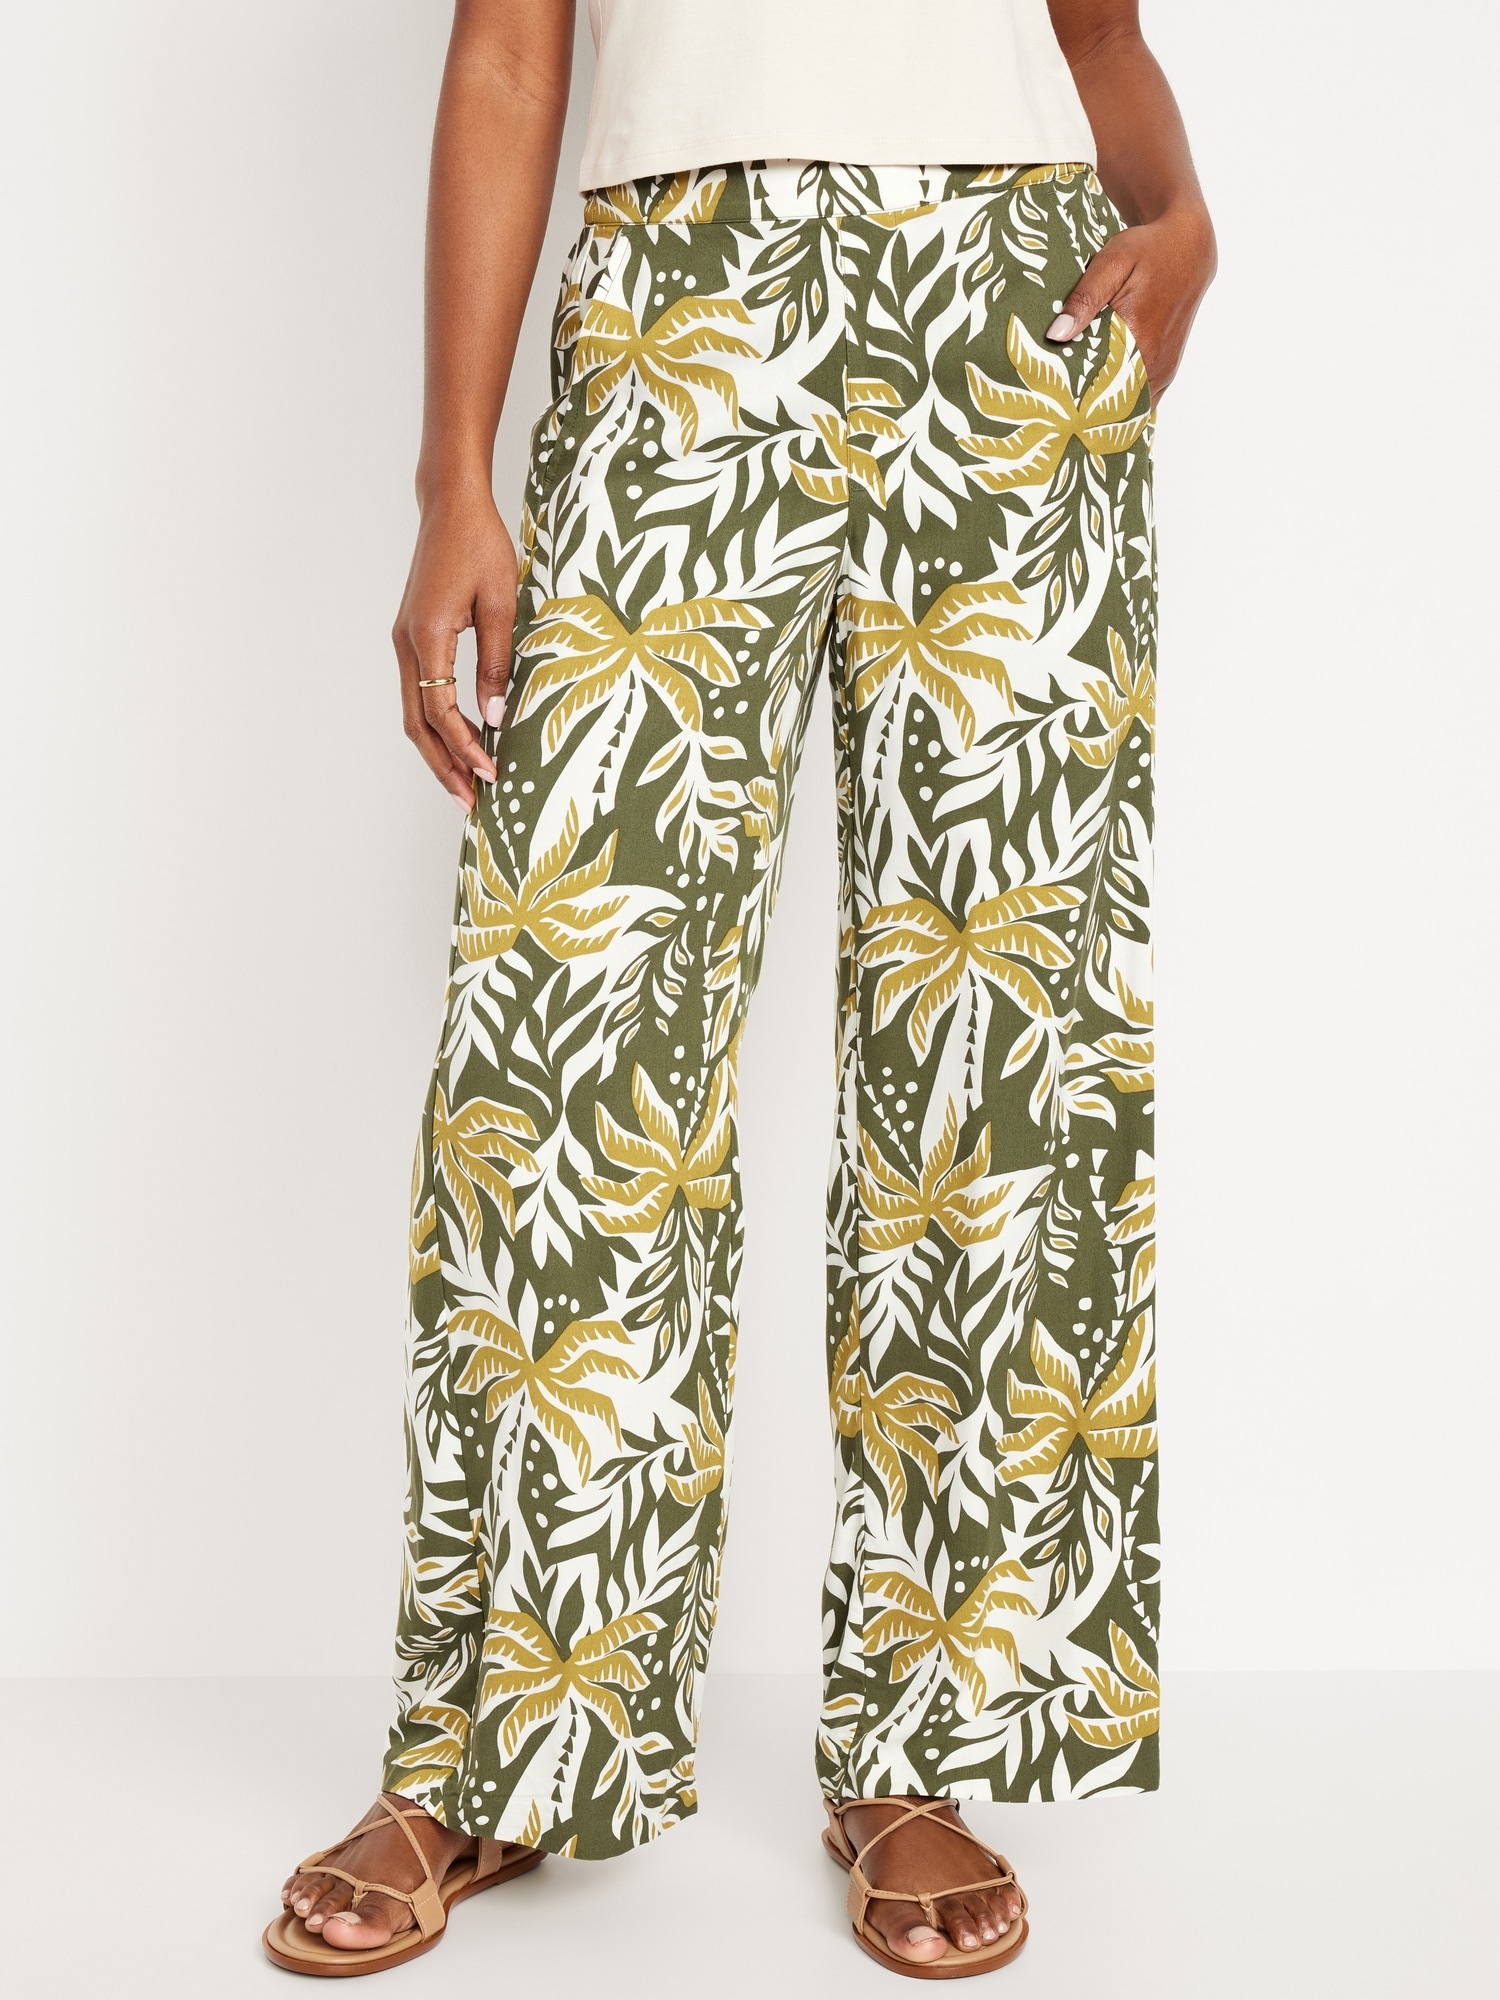 Palm Leaves Print Pants Hawaiian Floral Aesthetic Straight Wide Leg Pants  High Waisted Office Trousers Large Size - AliExpress